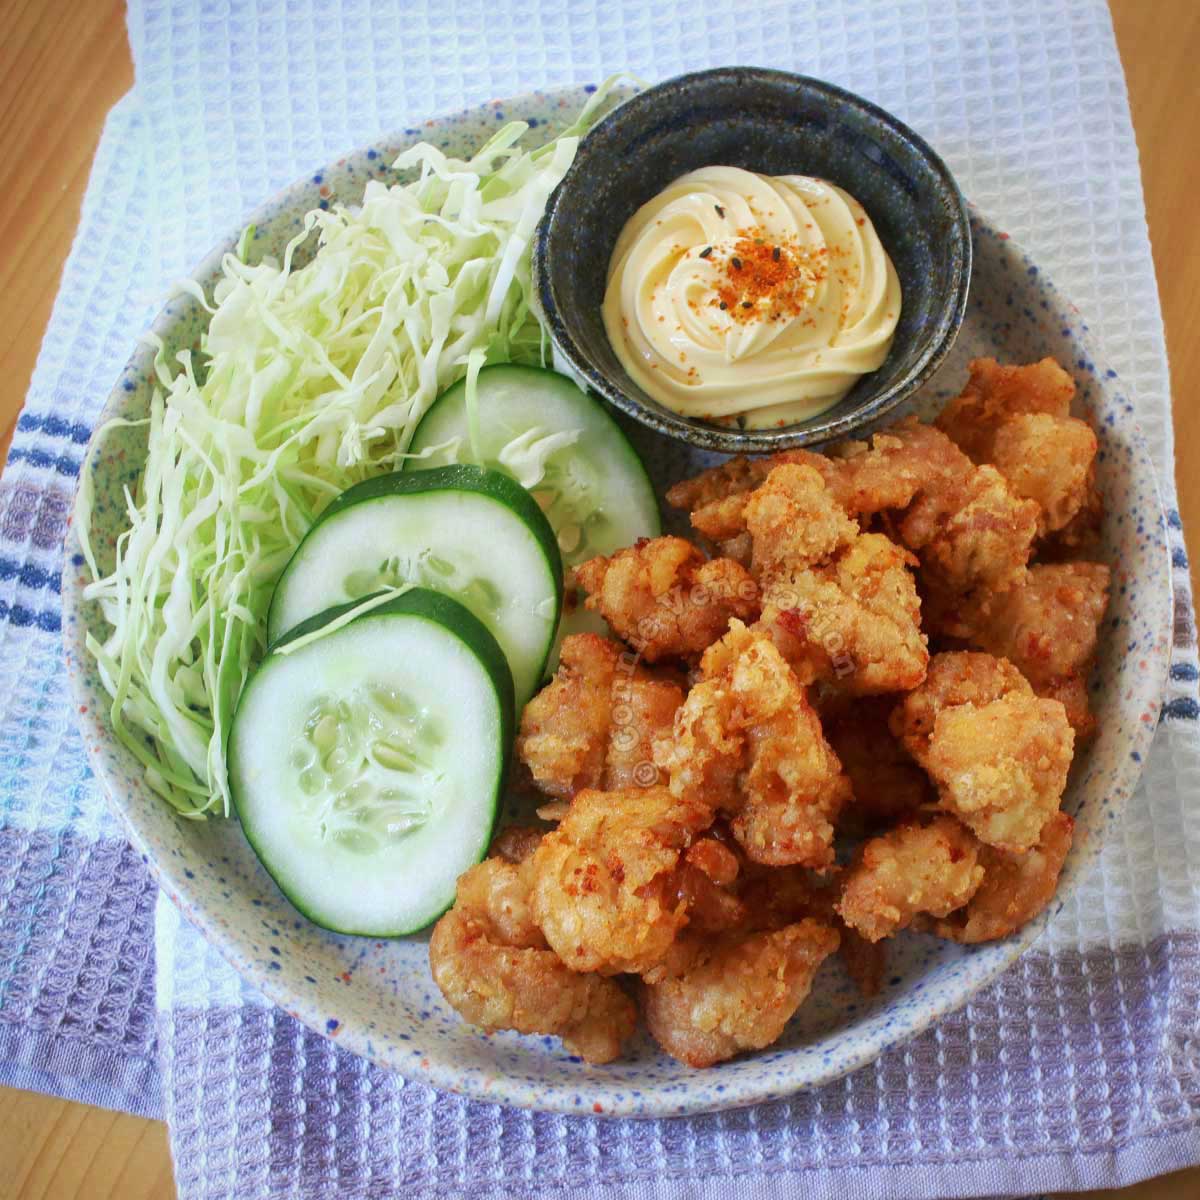 Chicken karaage with shredded cabbage and Japanese mayo